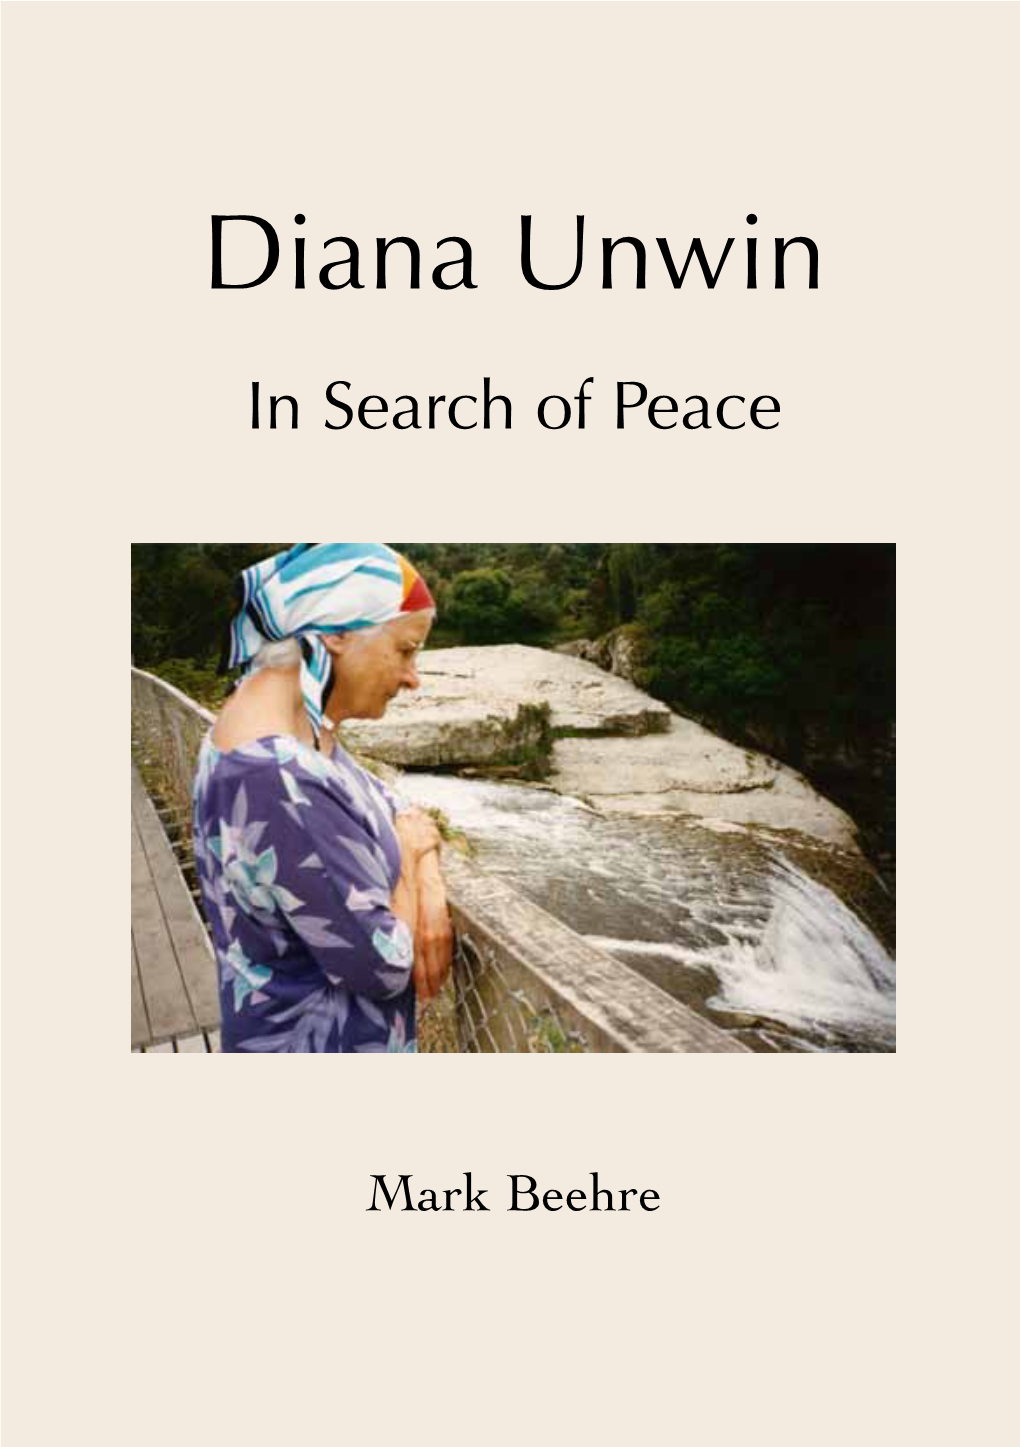 Diana Unwin in Search of Peace